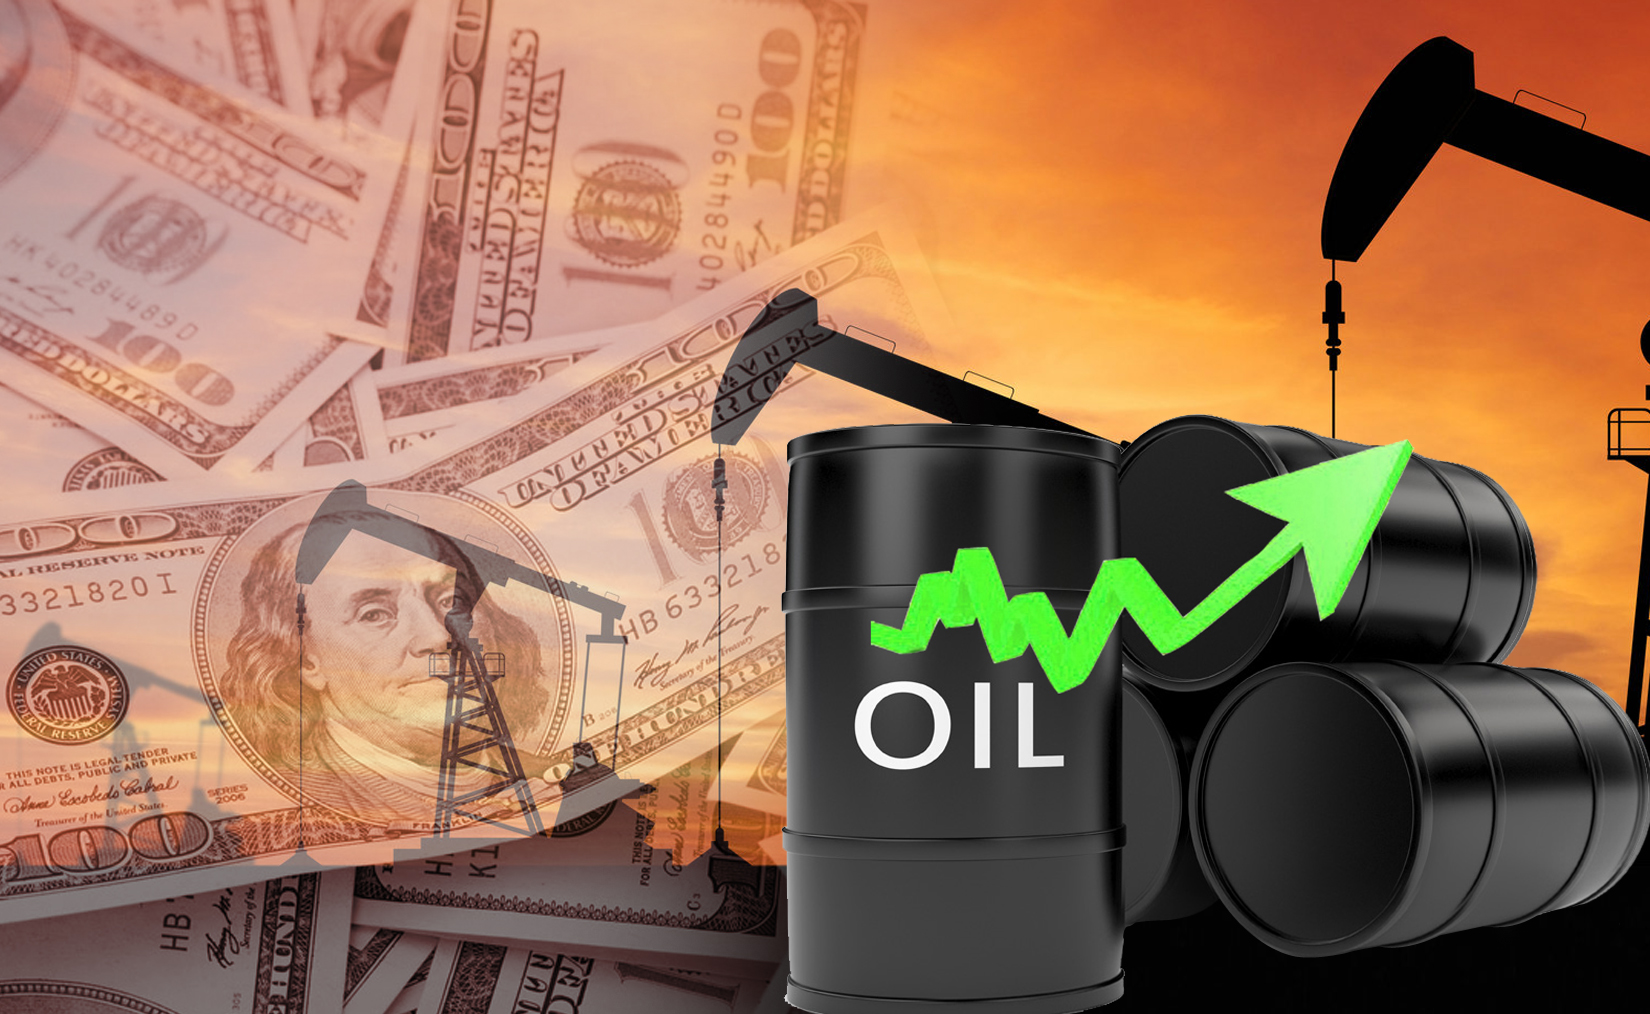 Kuwait oil price up to 71 cents to USD 56.65 pb - KPC                                                                                                                                                                                                     